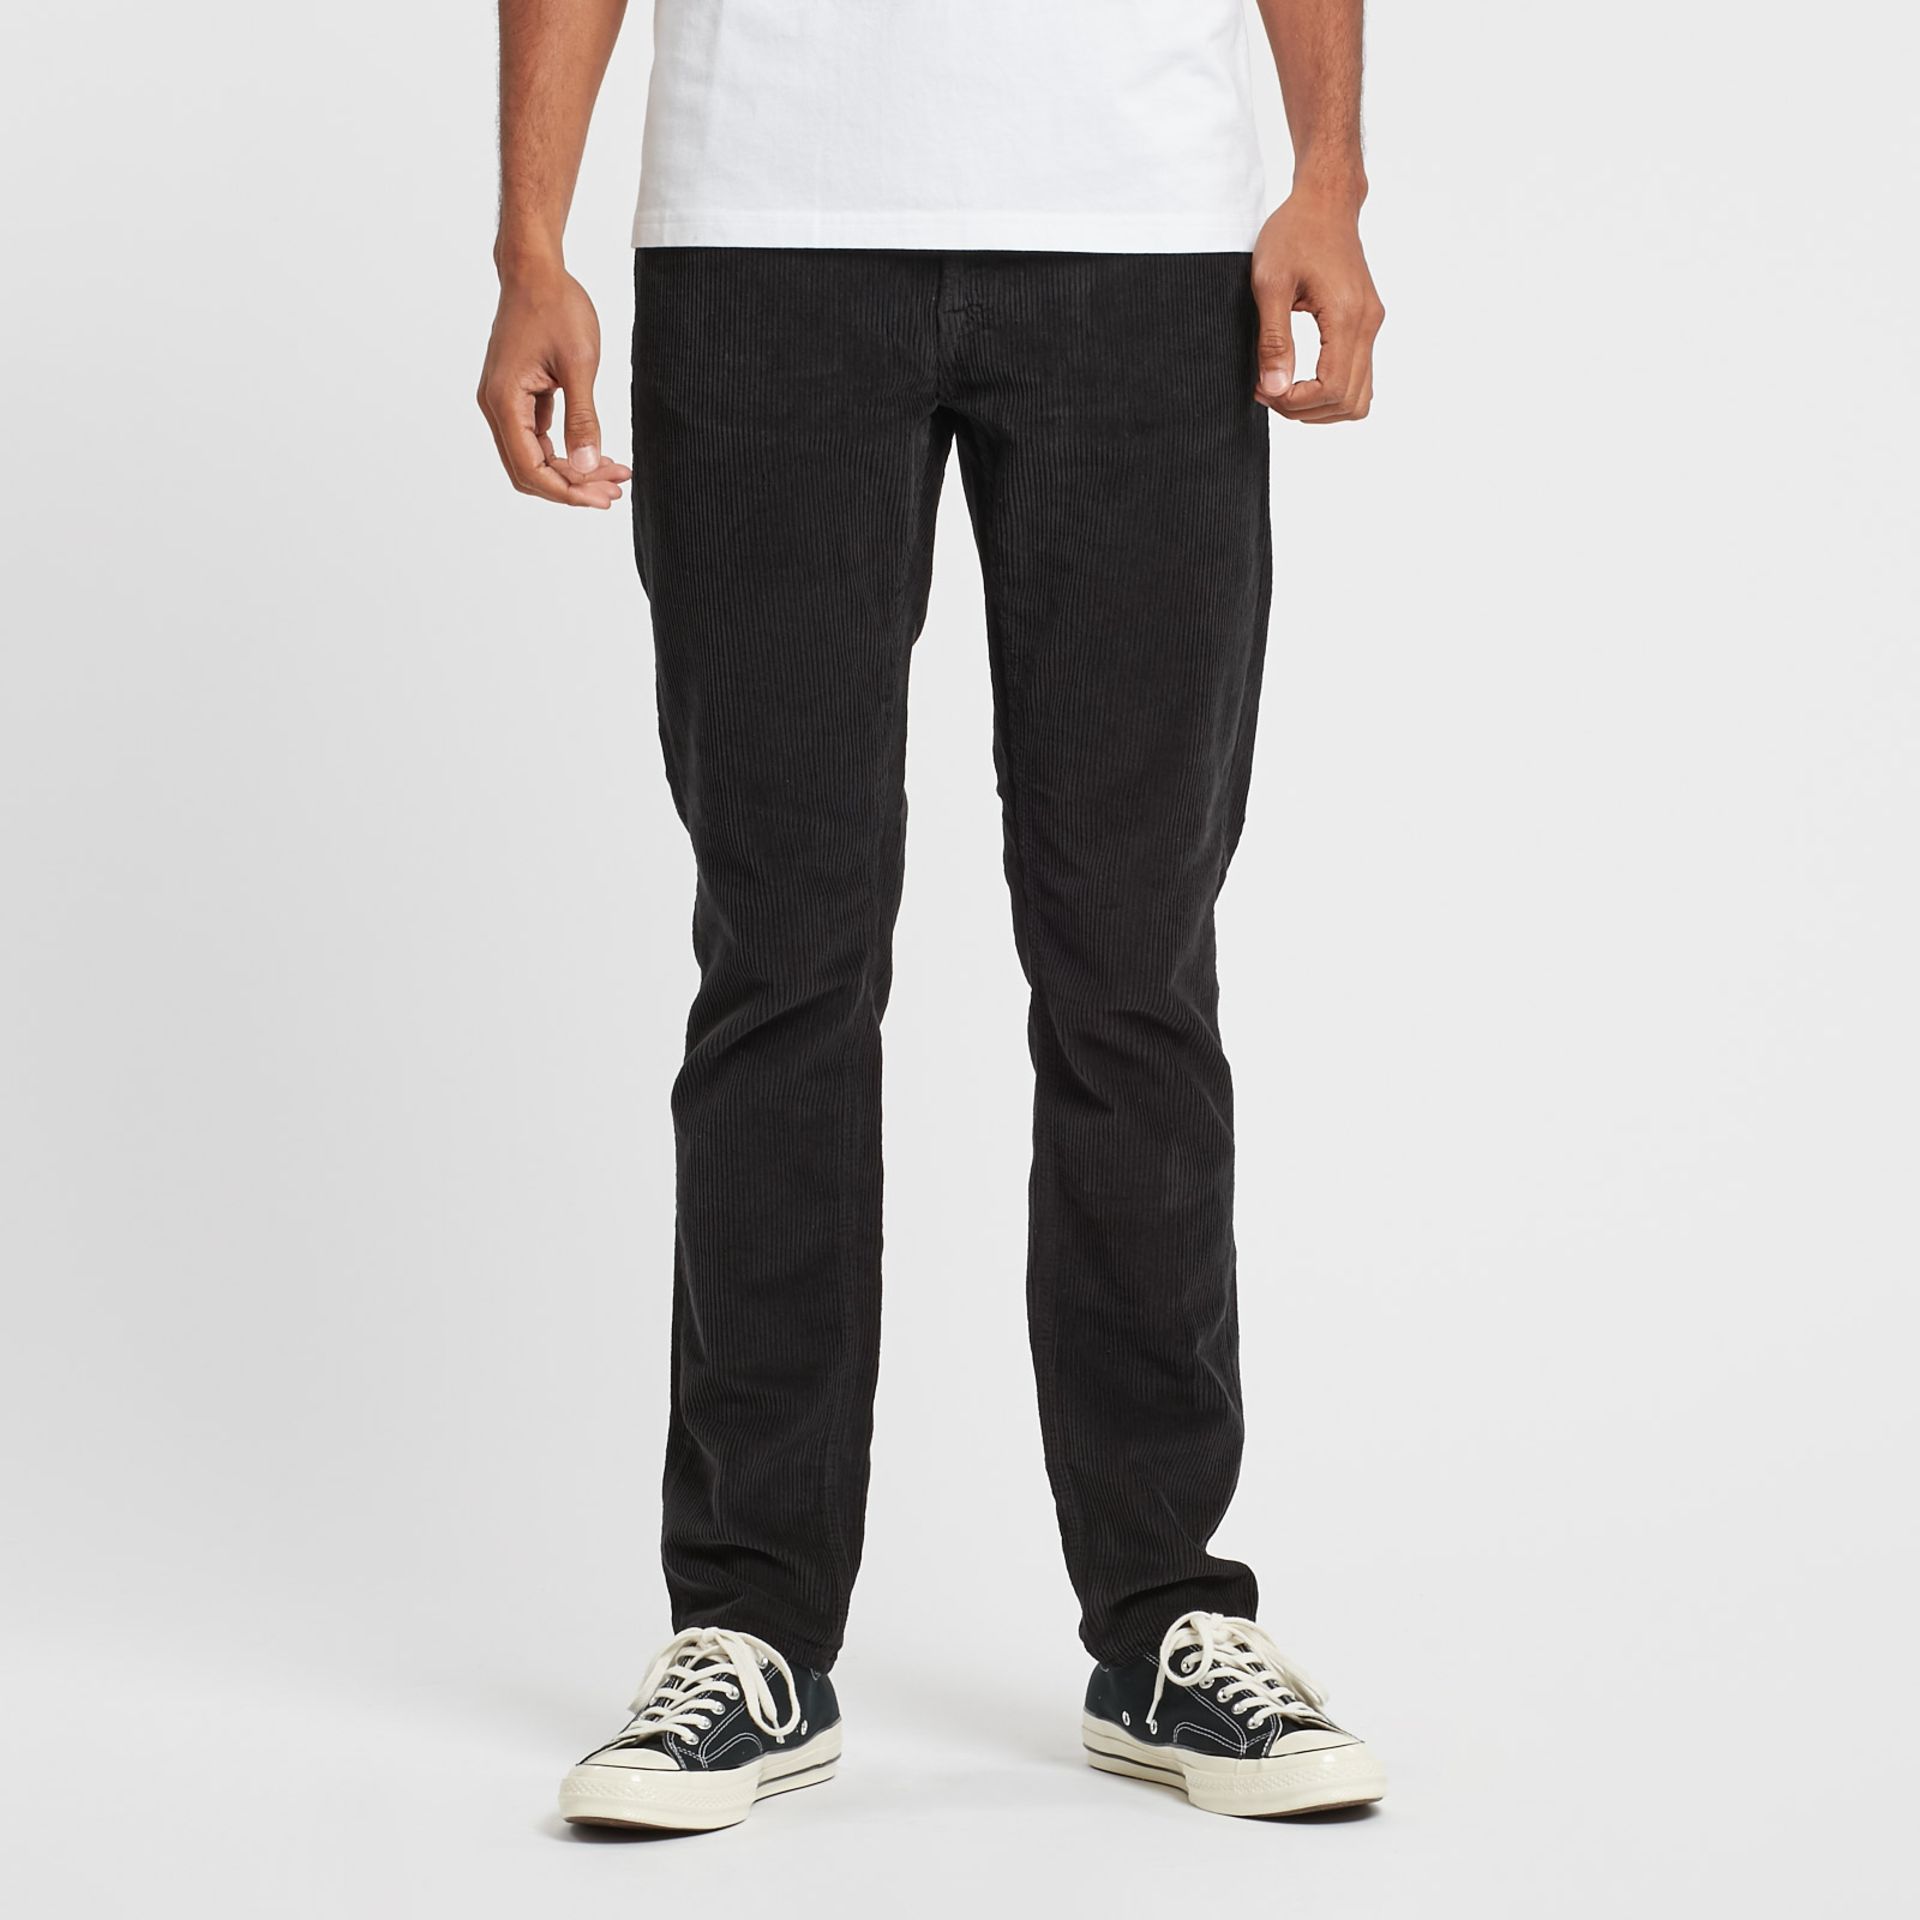 THE CORDS & CO. "PER" MEN'S/HIGH-WAIST/ STRAIGHT FIT/ NARROW LEG MSRP $160 - Image 2 of 5